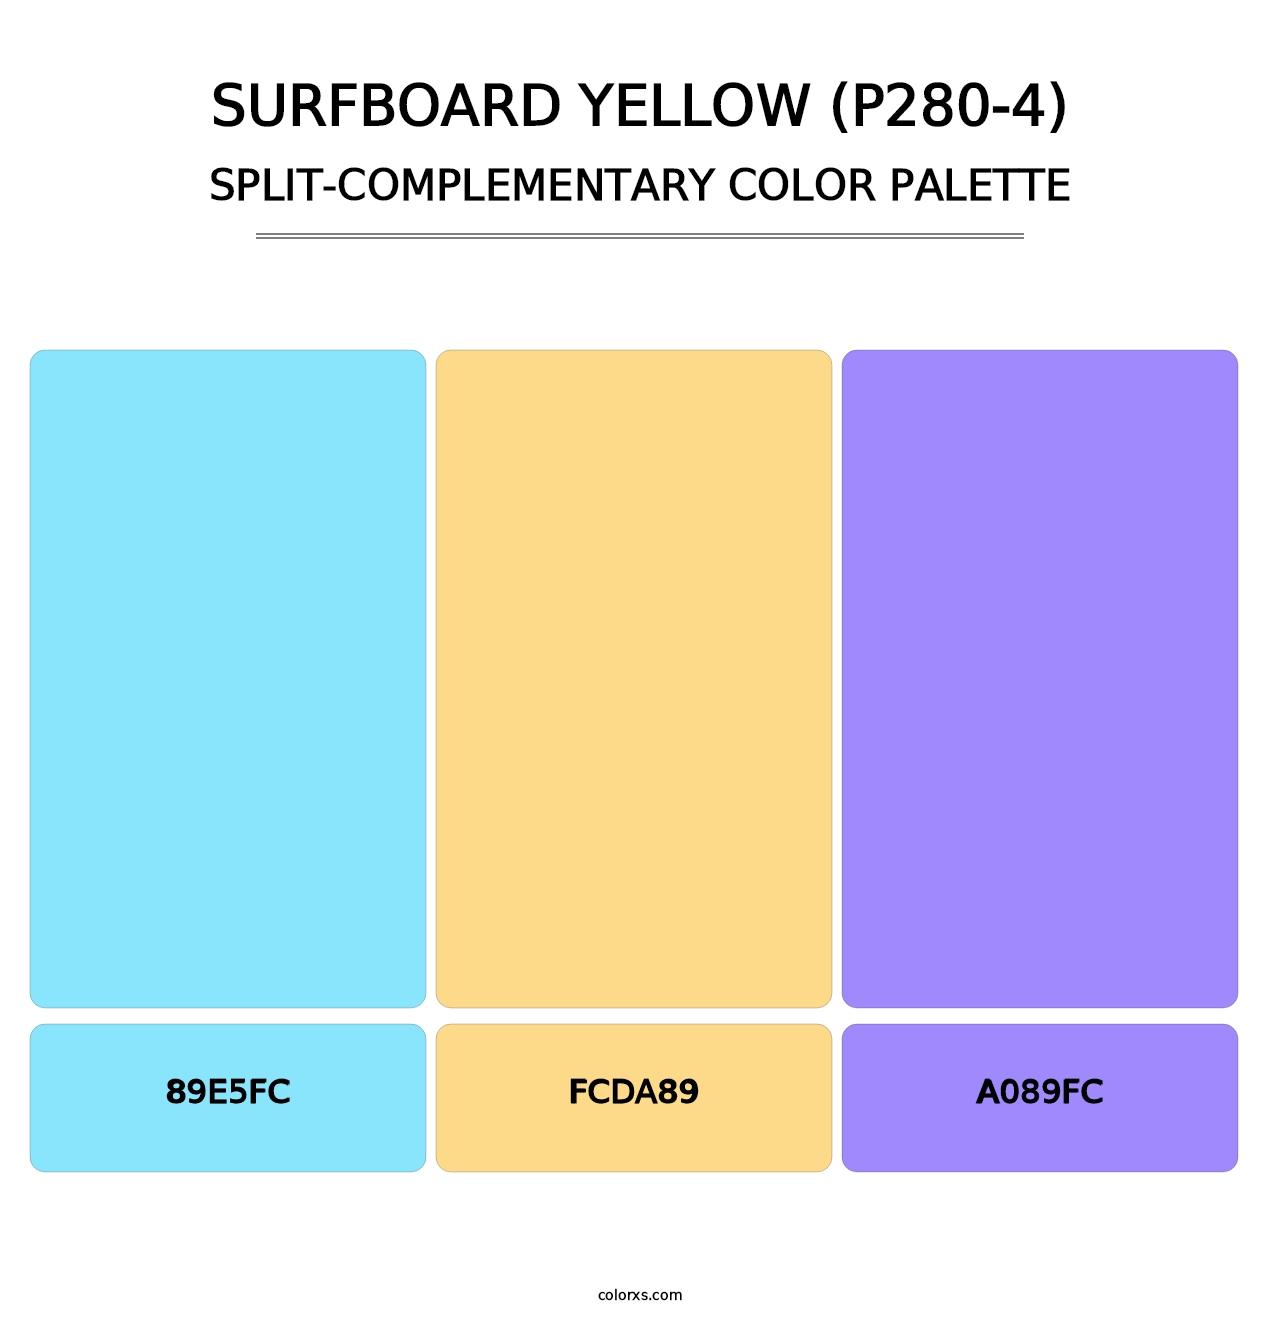 Surfboard Yellow (P280-4) - Split-Complementary Color Palette